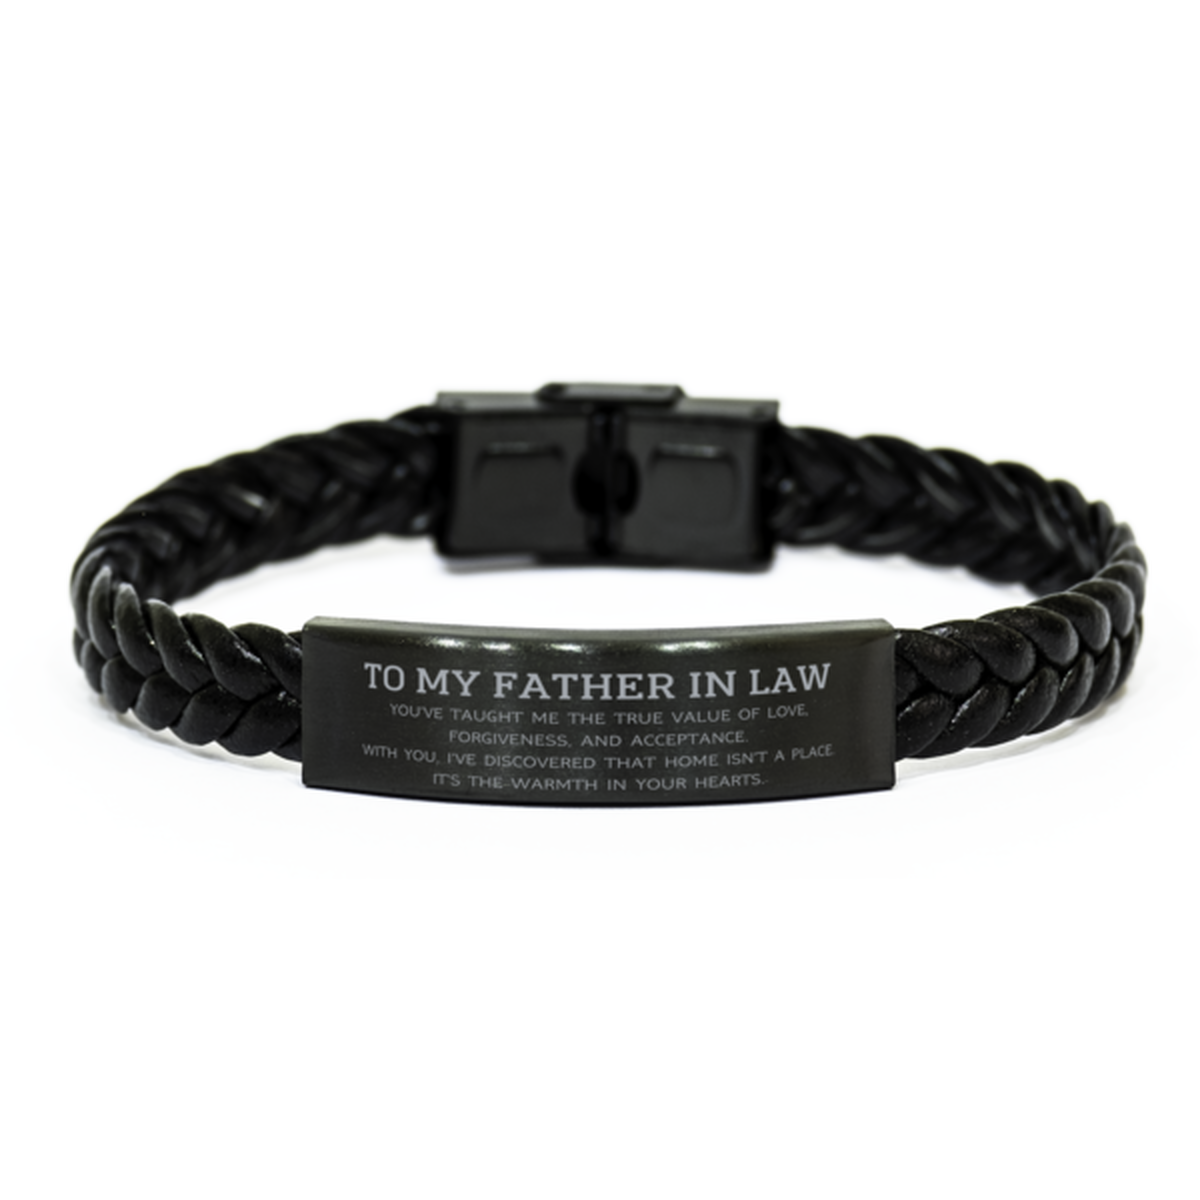 To My Father In Law Gifts, You've taught me the true value of love, Thank You Gifts For Father In Law, Birthday Braided Leather Bracelet For Father In Law